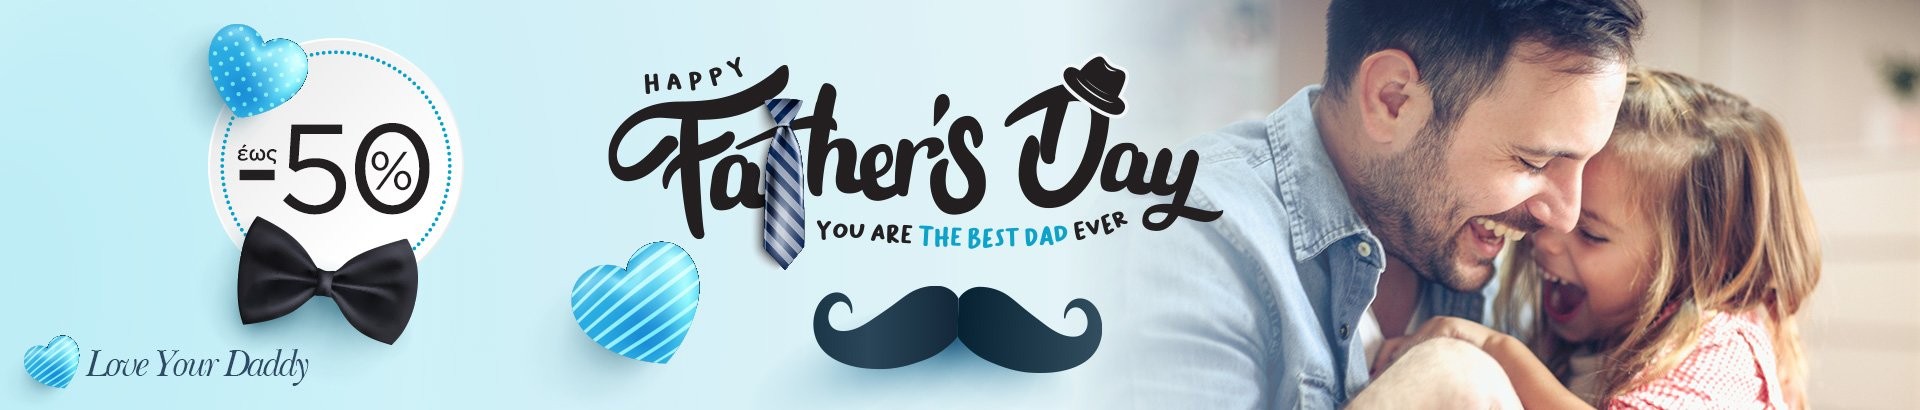 father's day